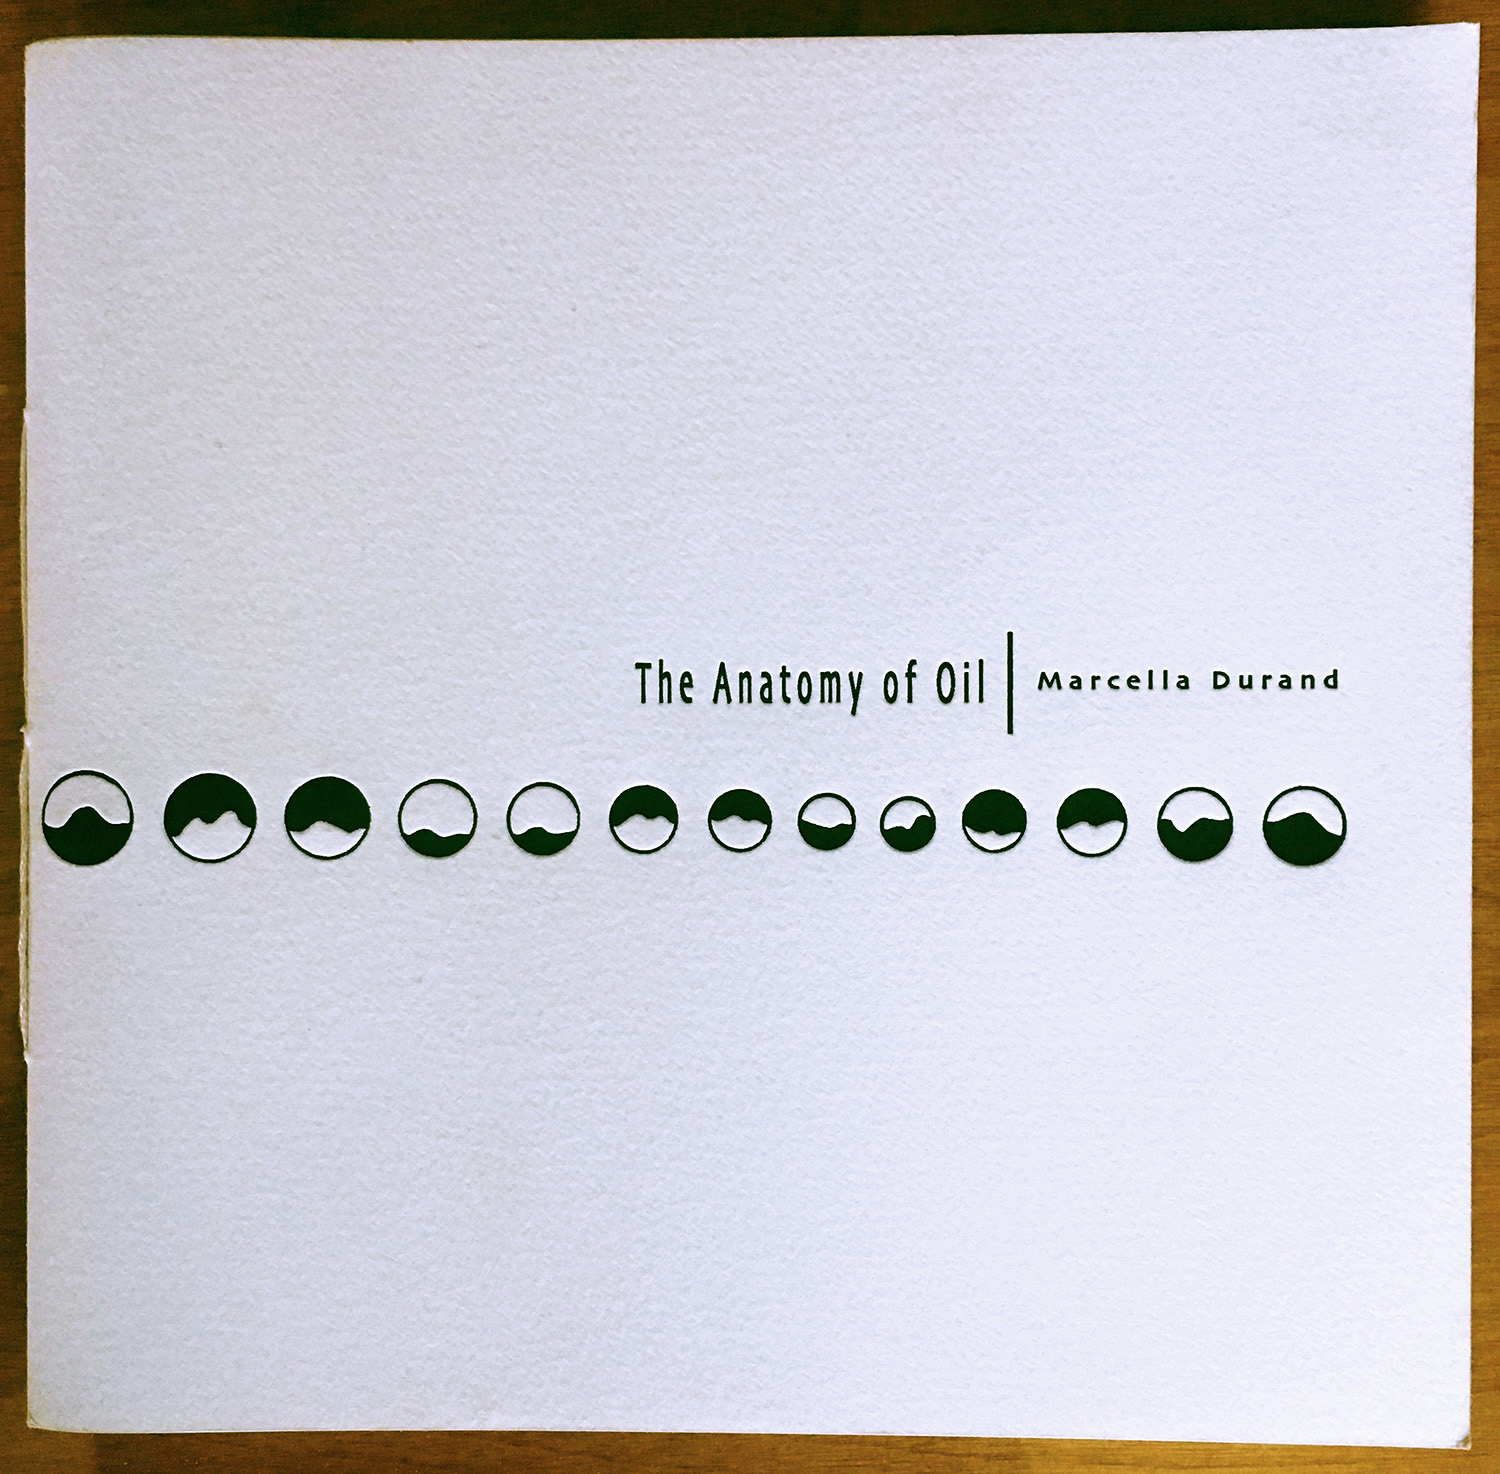 cover of Marcella Durand's letterpress book The Anatomy of Oil